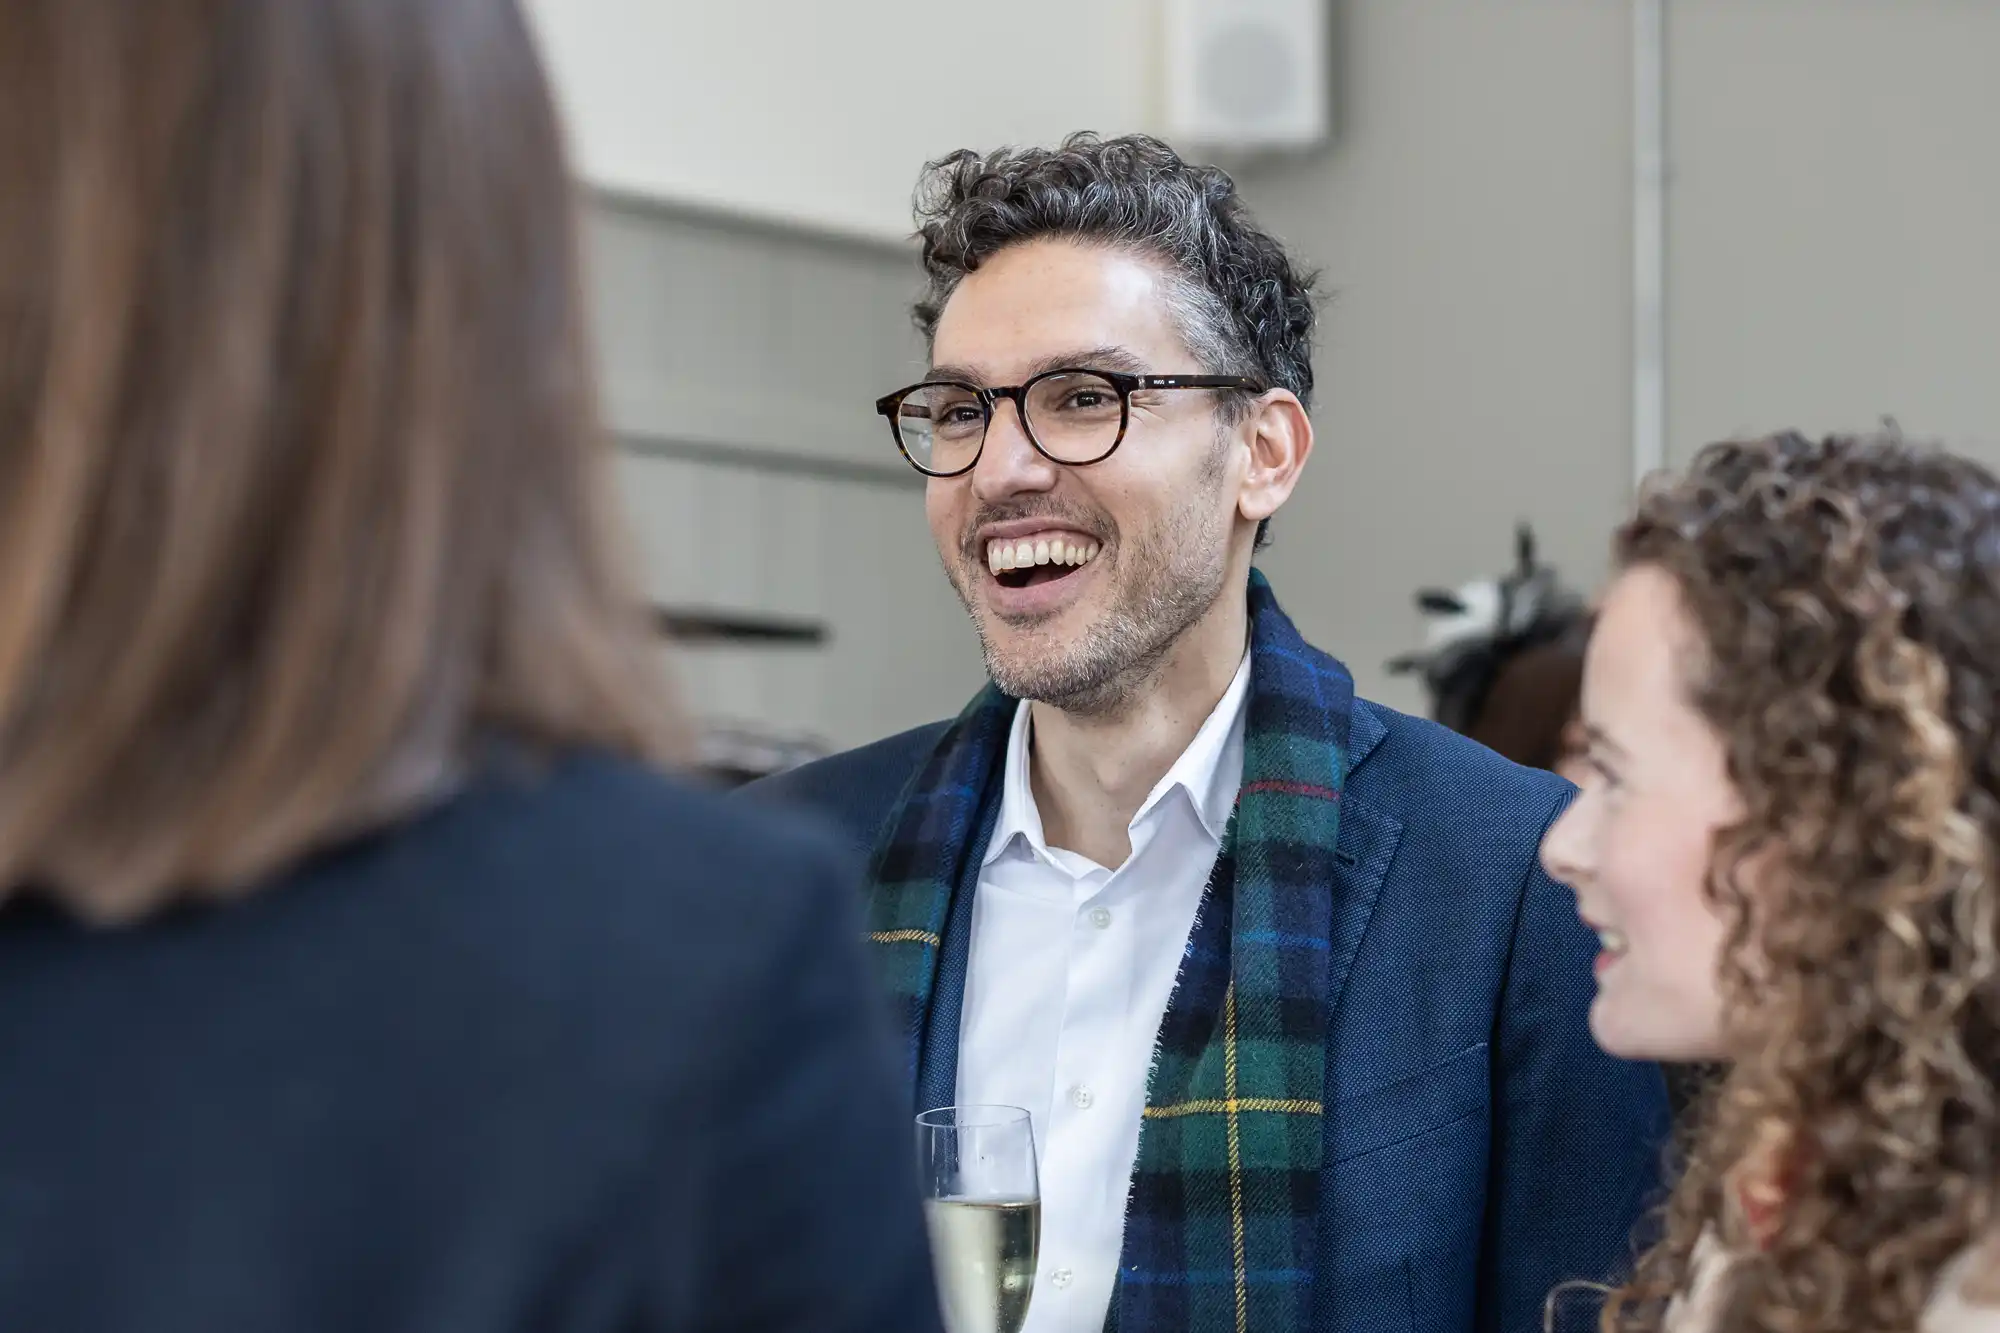 A man with glasses and a plaid scarf smiles while holding a drink, engaging in conversation with two other people.